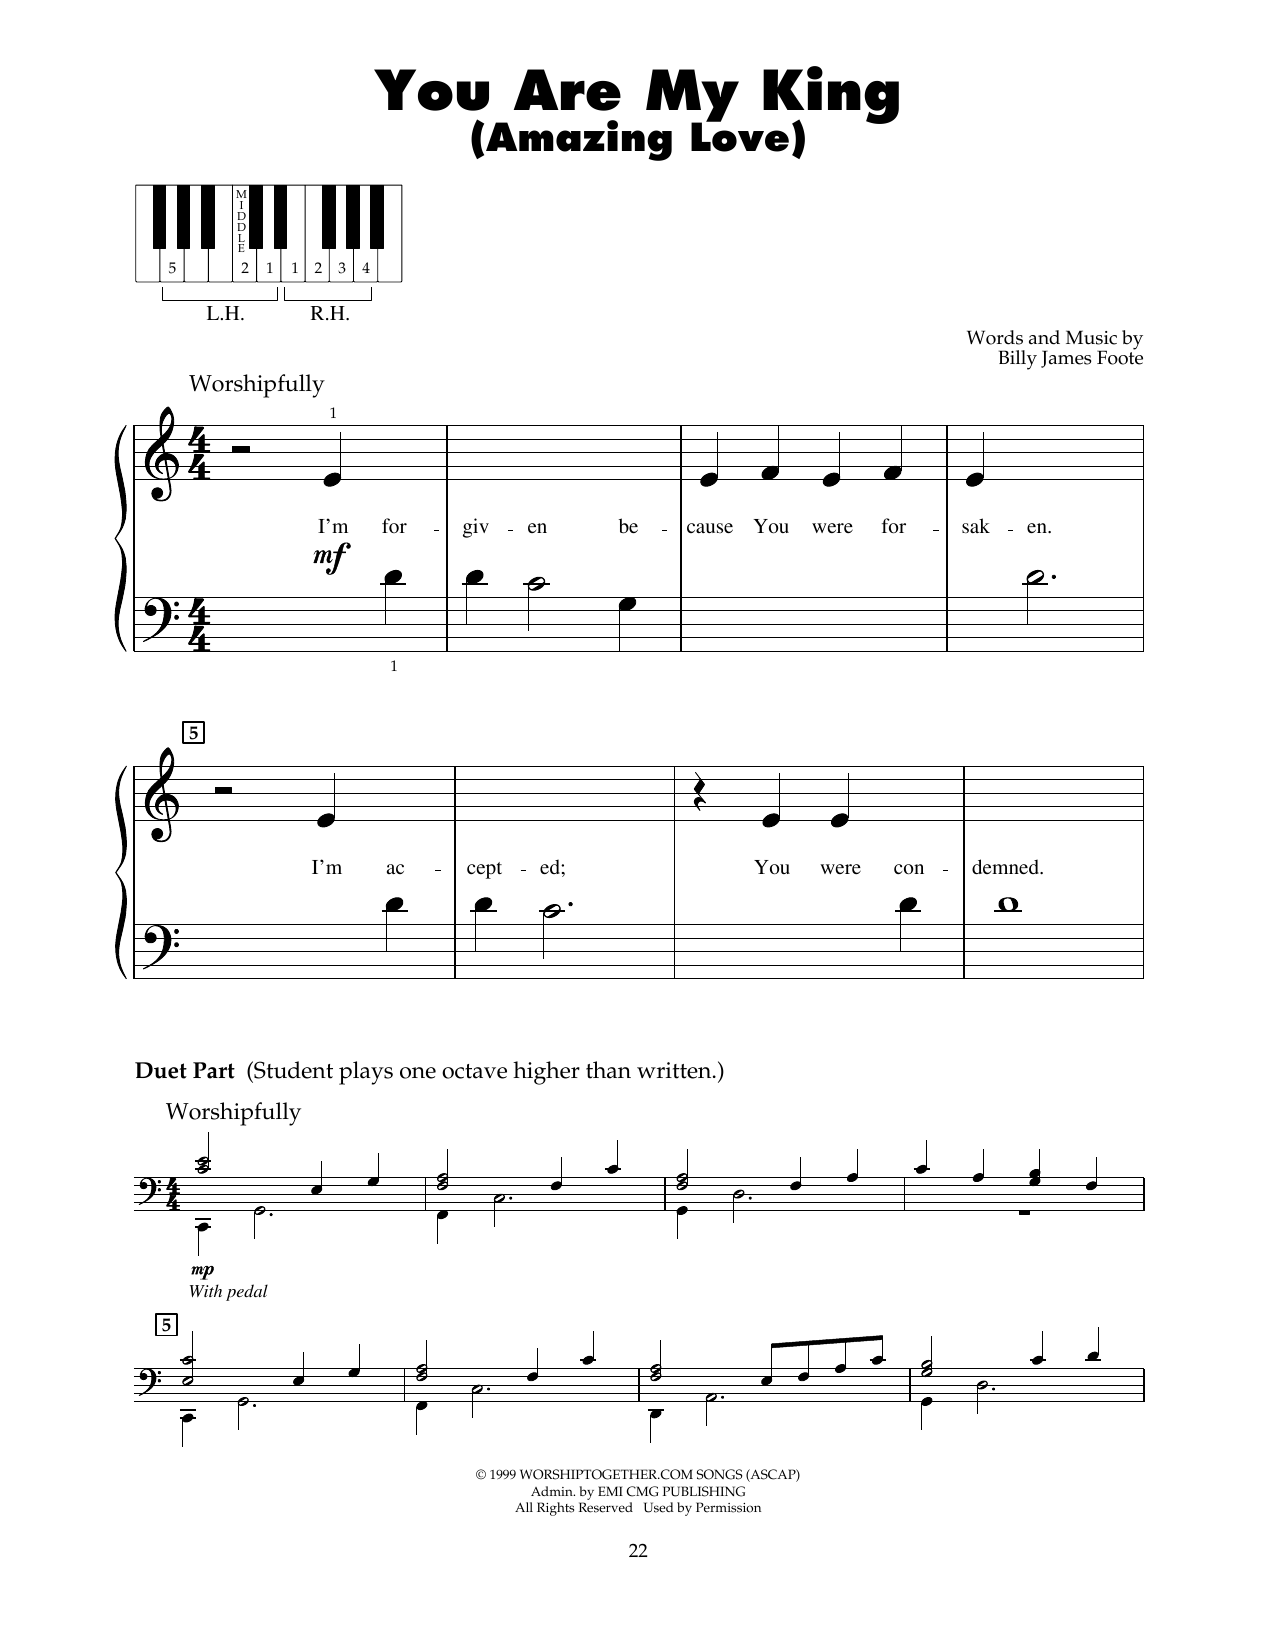 Newsboys You Are My King (Amazing Love) sheet music notes printable PDF score